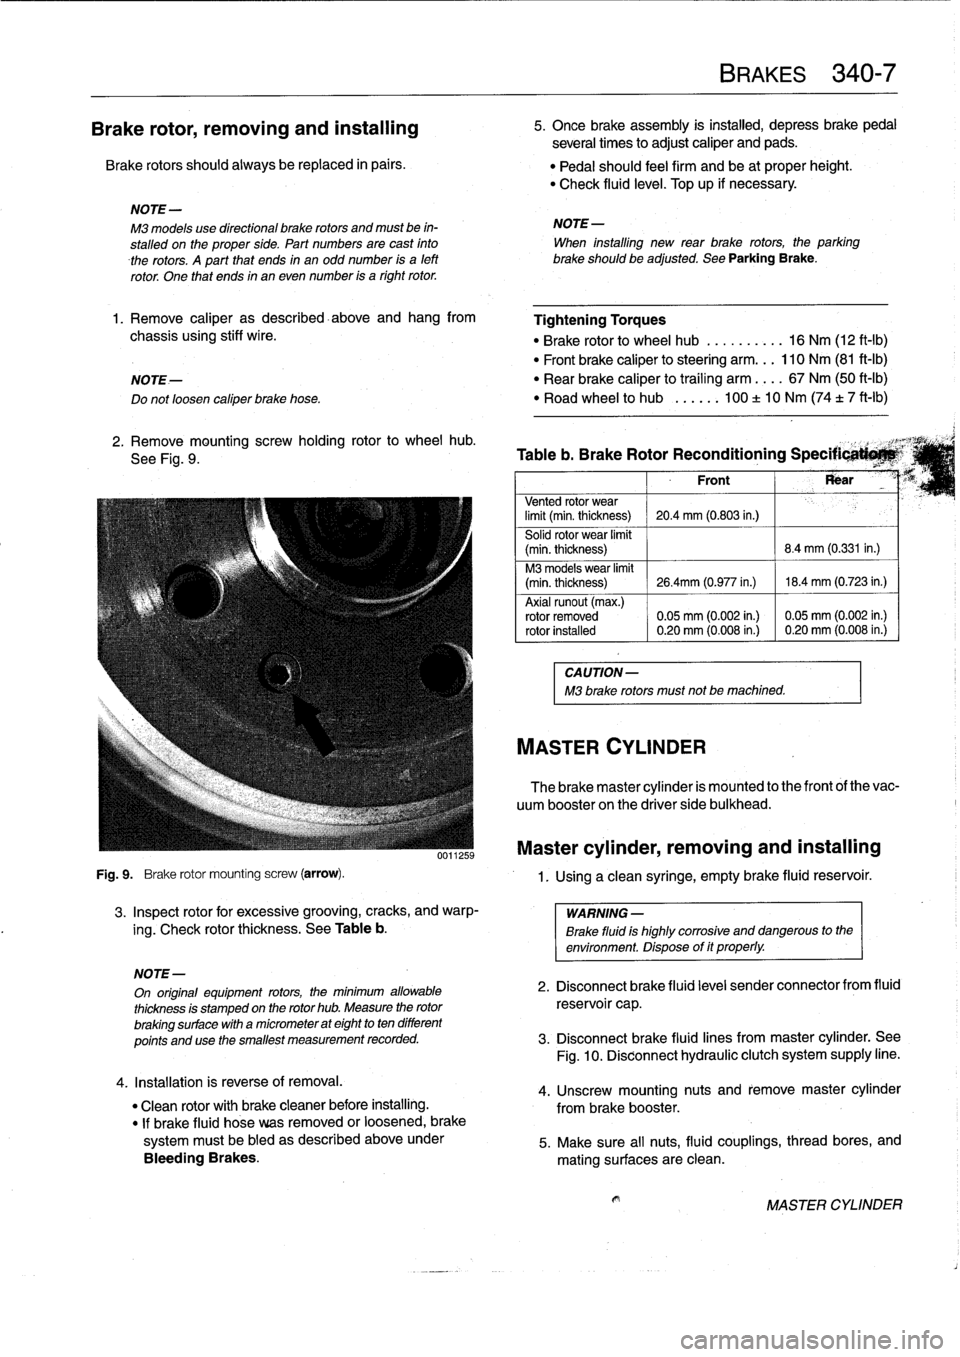 BMW 323i 1993 E36 Owners Manual 
Brake
rotor,
removing
and
installing

Brake
rotors
shouldalways
be
replaced
in
pairs
.

Fig
.
9
.

	

Brake
rotor
mounting
screw
(arrow)
.

3
.
Inspect
rotor
for
excessive
grooving,
cracks,
and
warp-